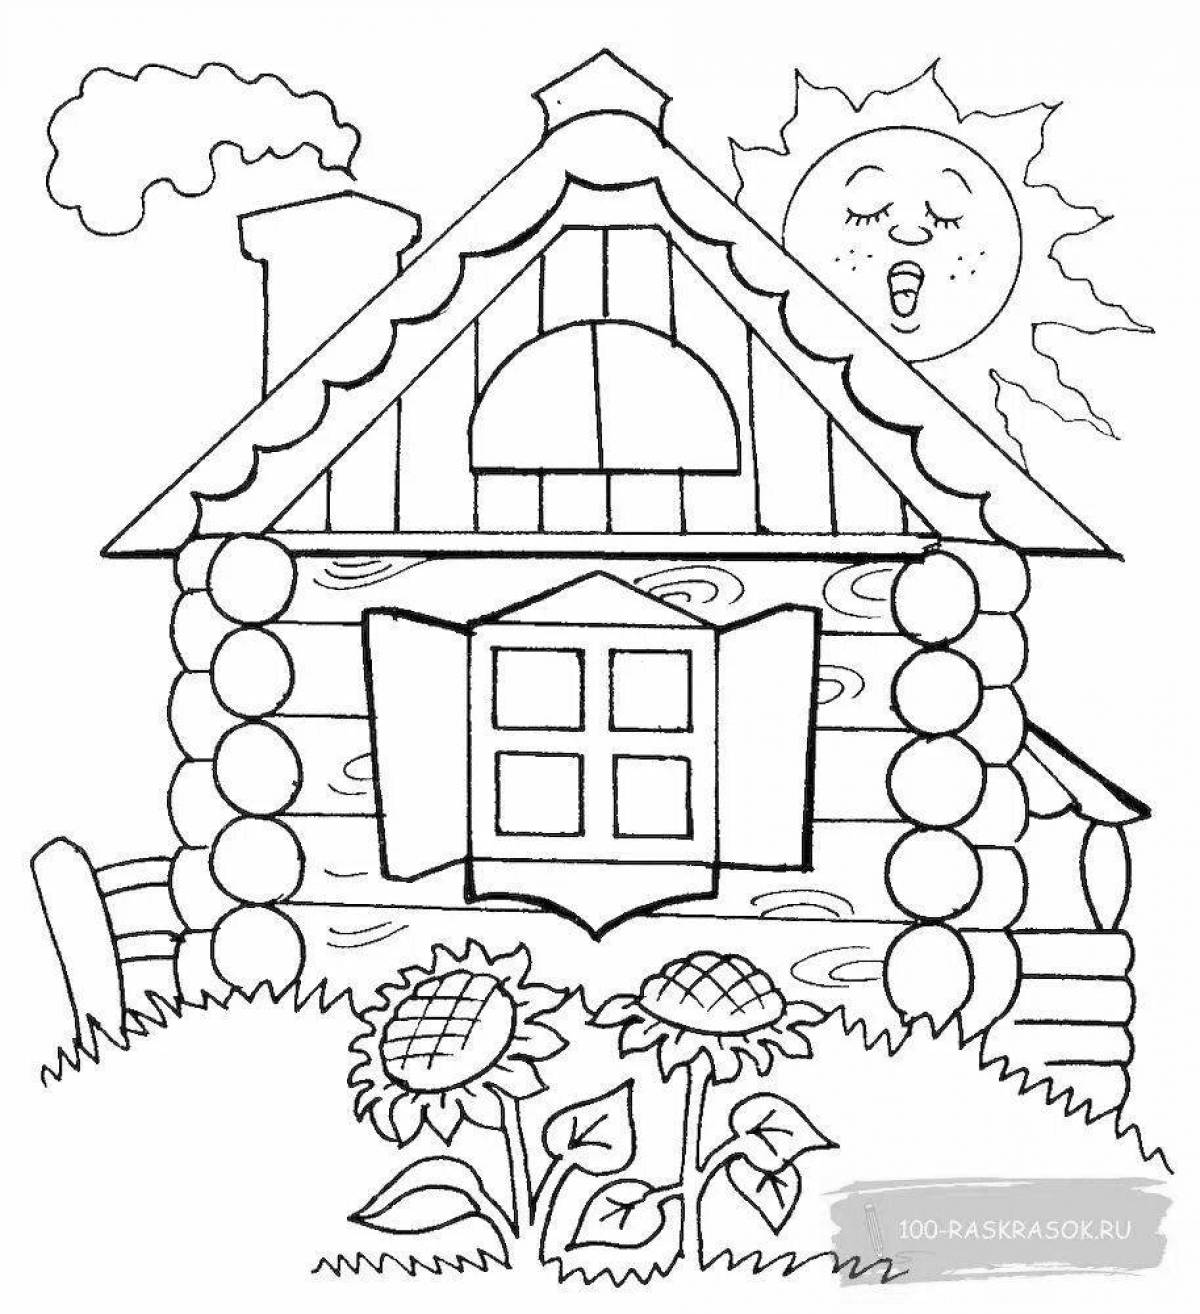 Colorful country house coloring book for kids